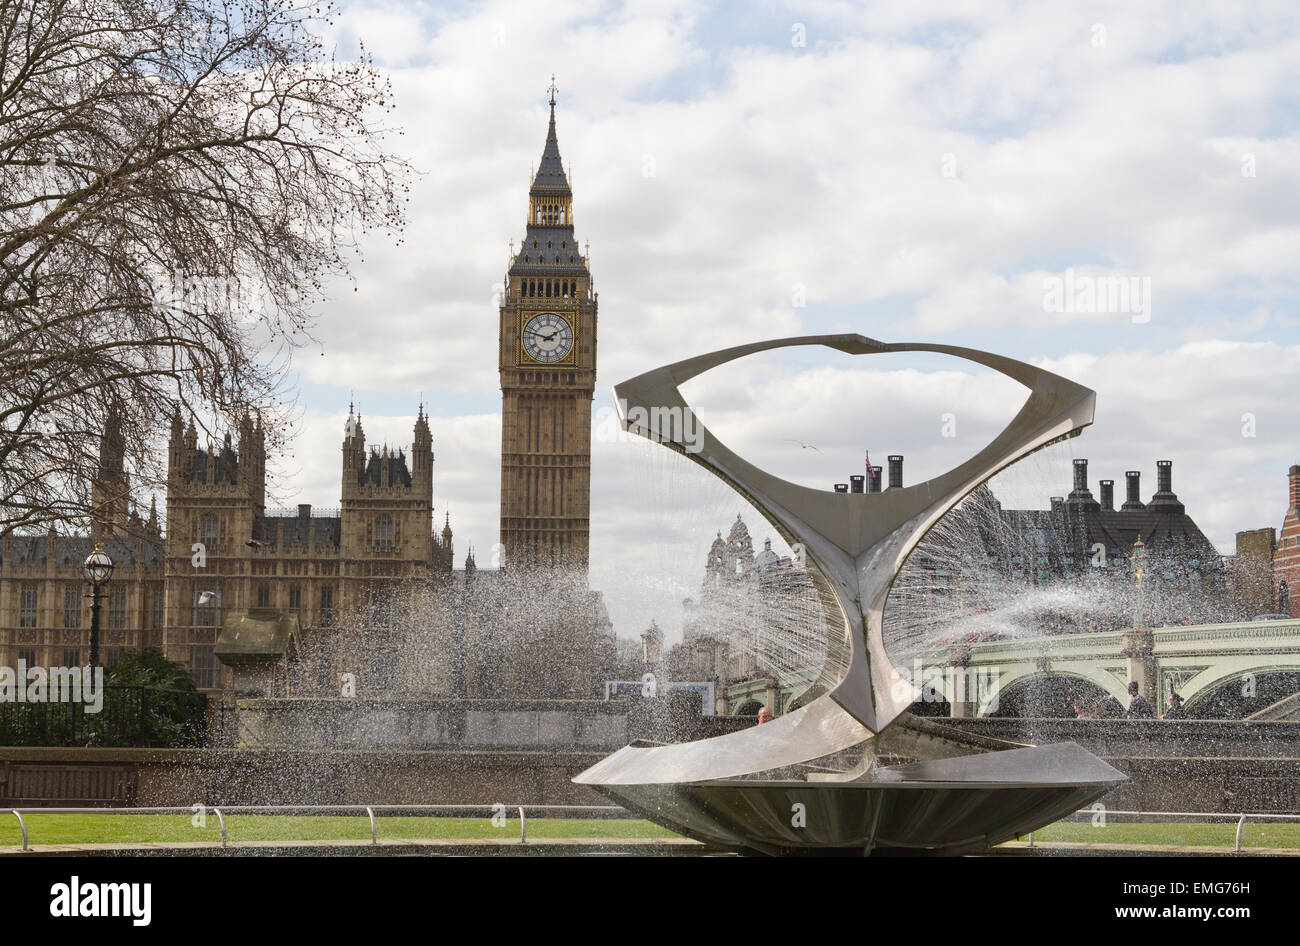 Big Ben and the Houses of Parliament behind a fountain sculpture. Stock Photo